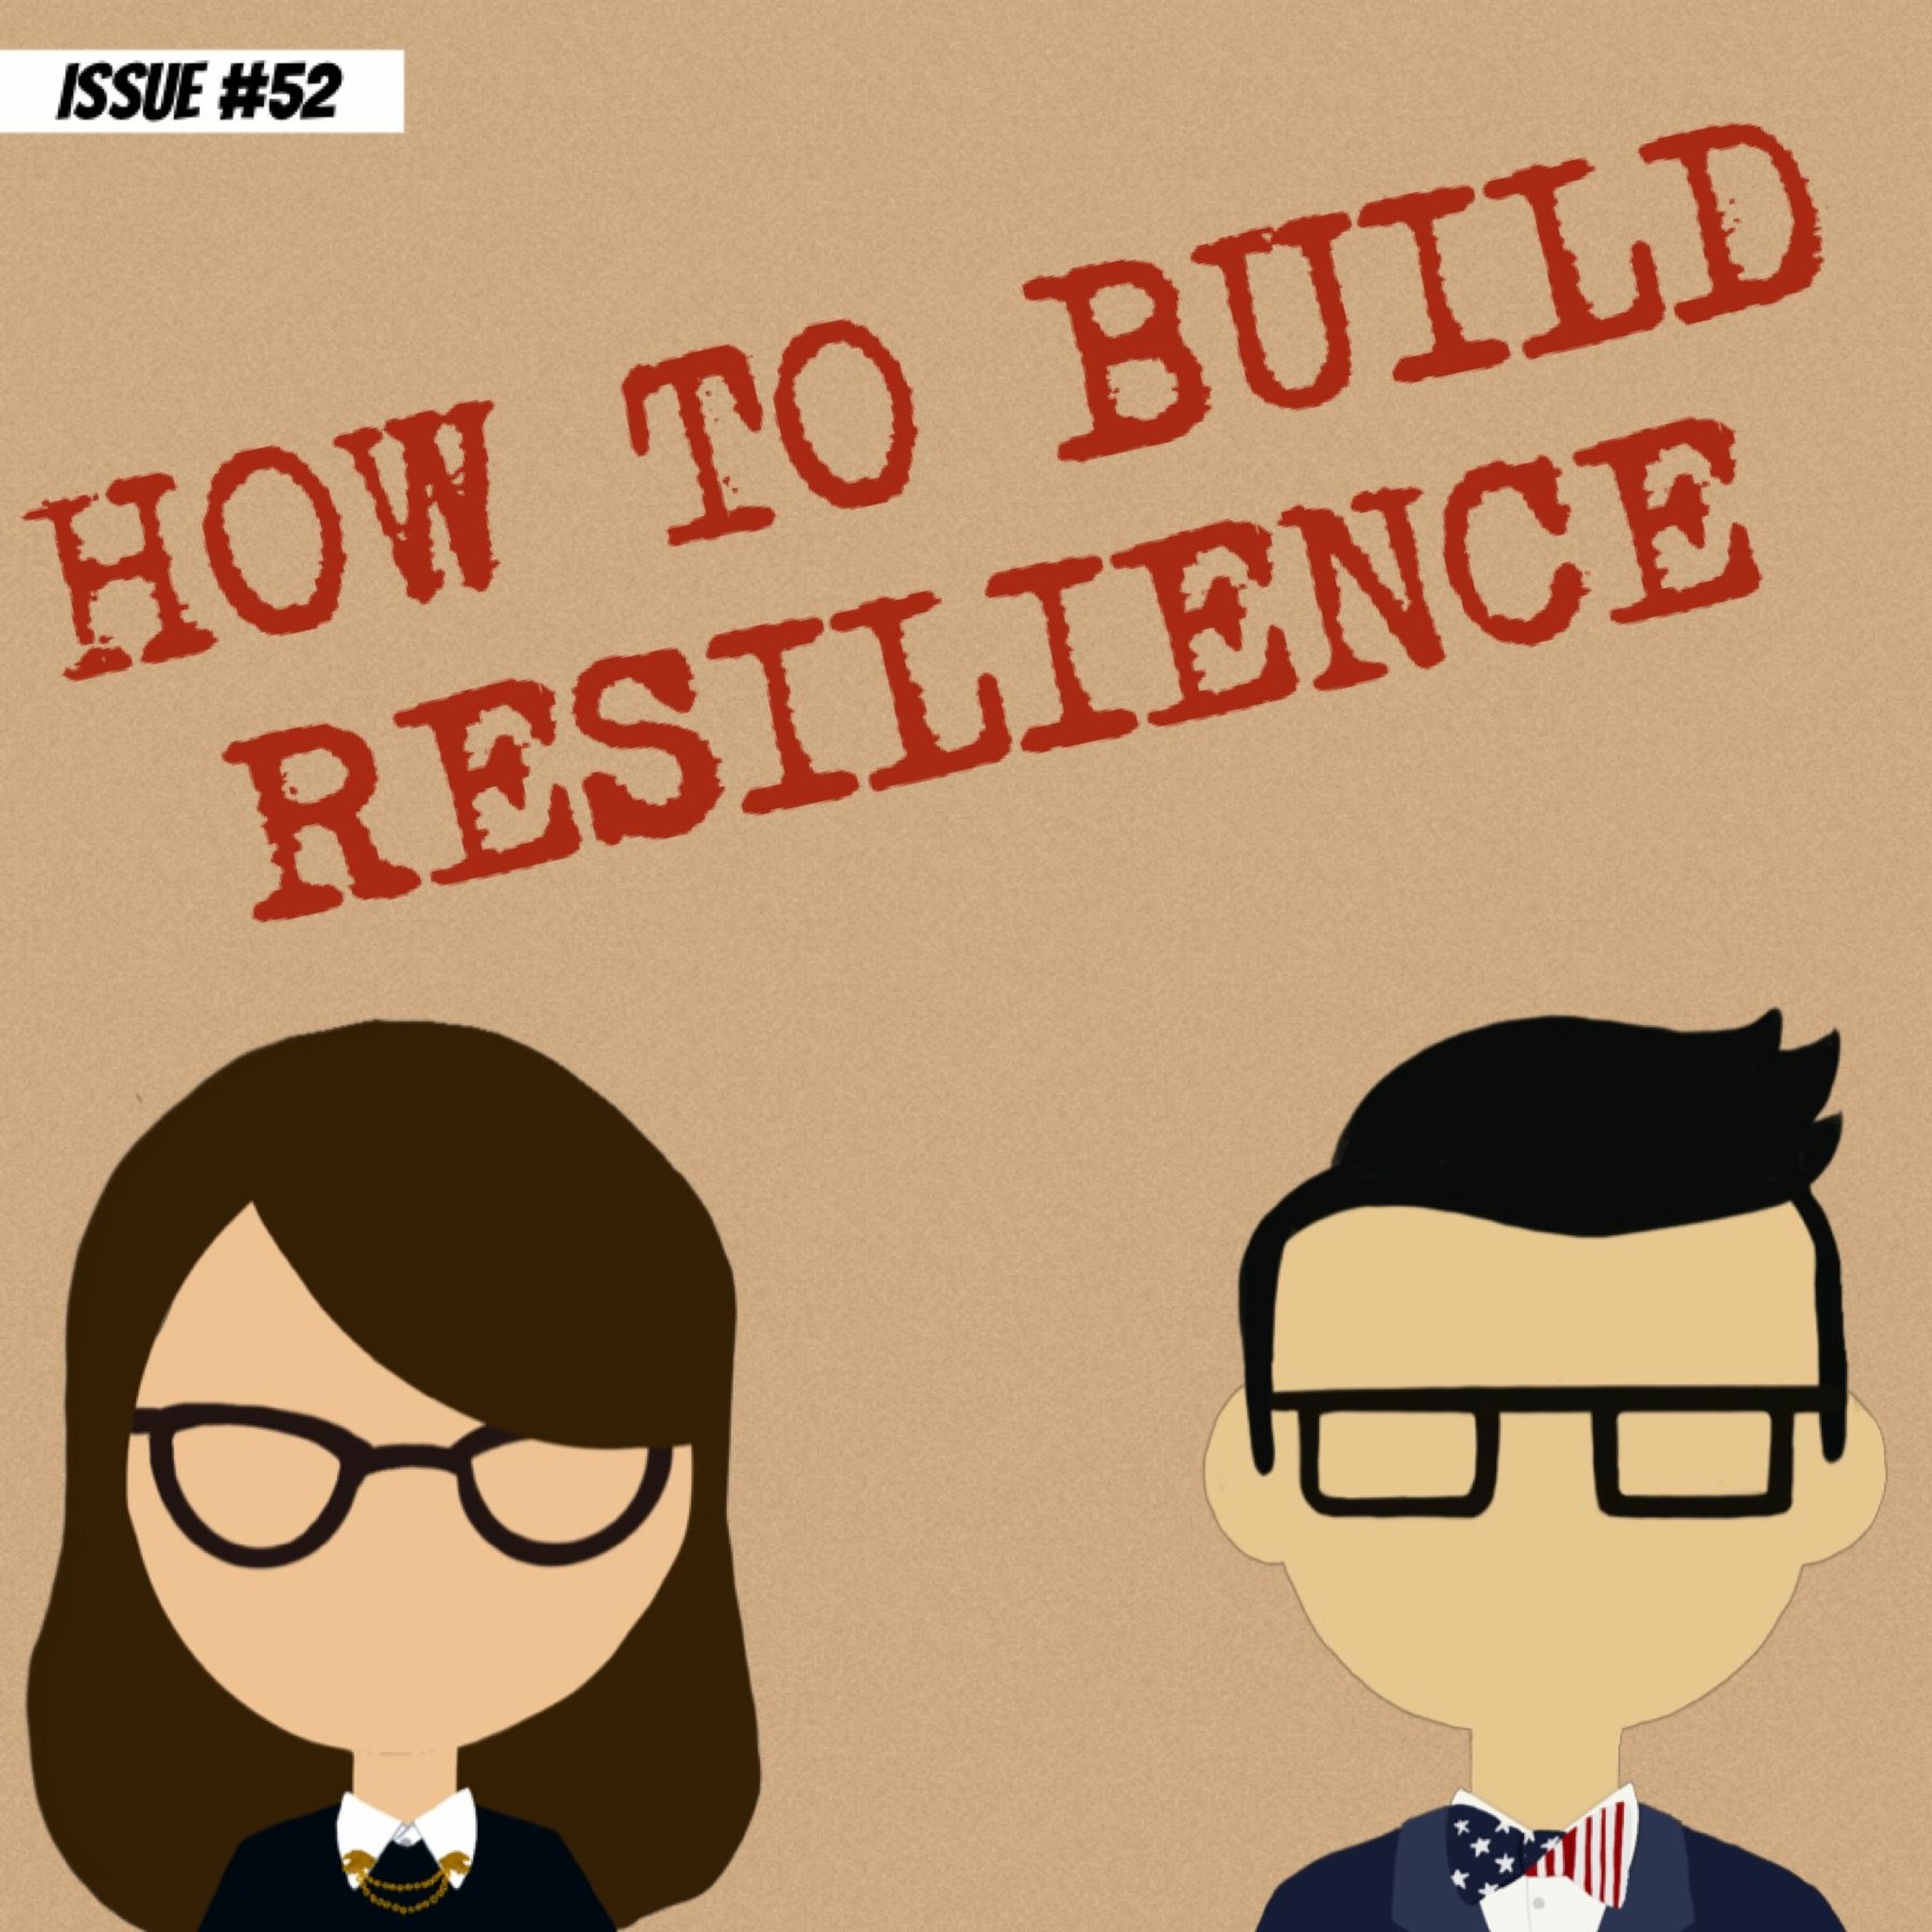 How to build RESILIENCE